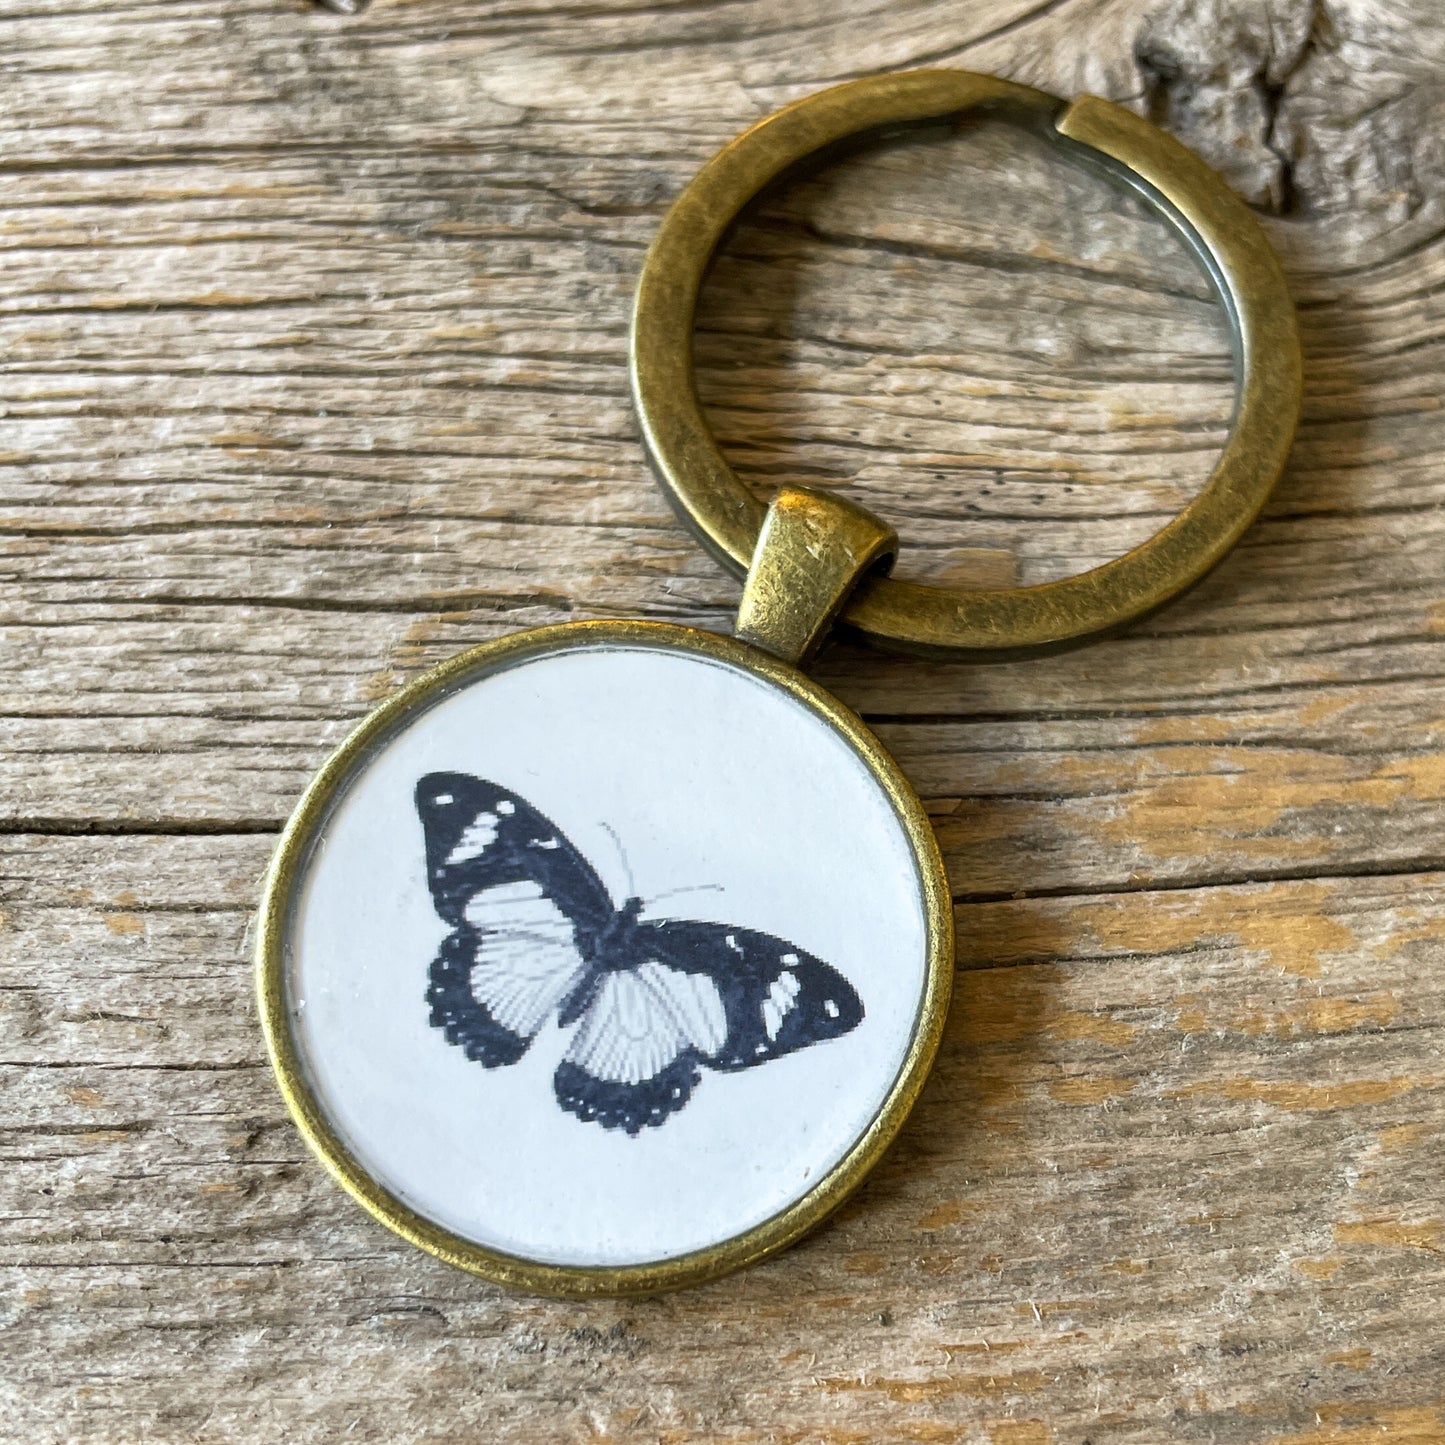 Butterfly Vintage Image Keychain